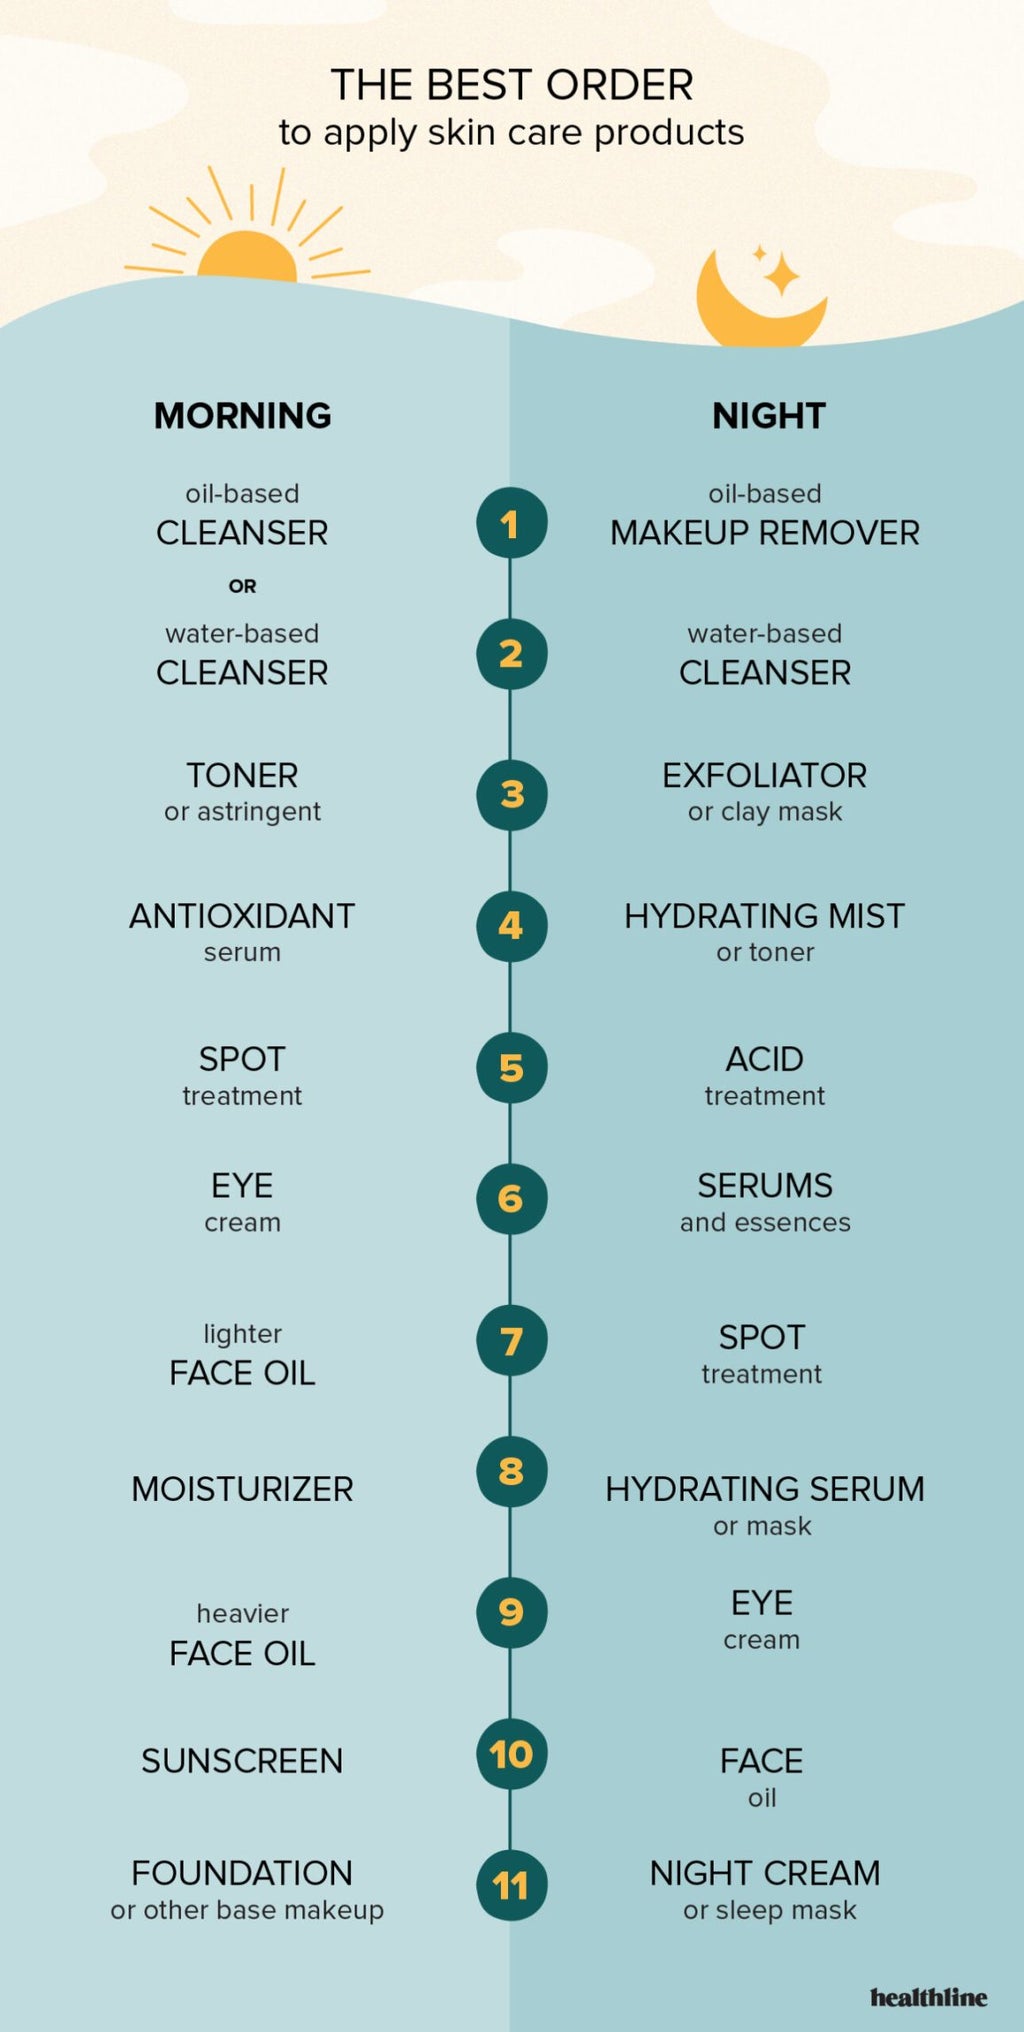 Blog #21- Skin Care from Alpha Hydroxy Acids to Zits (or A to Z)